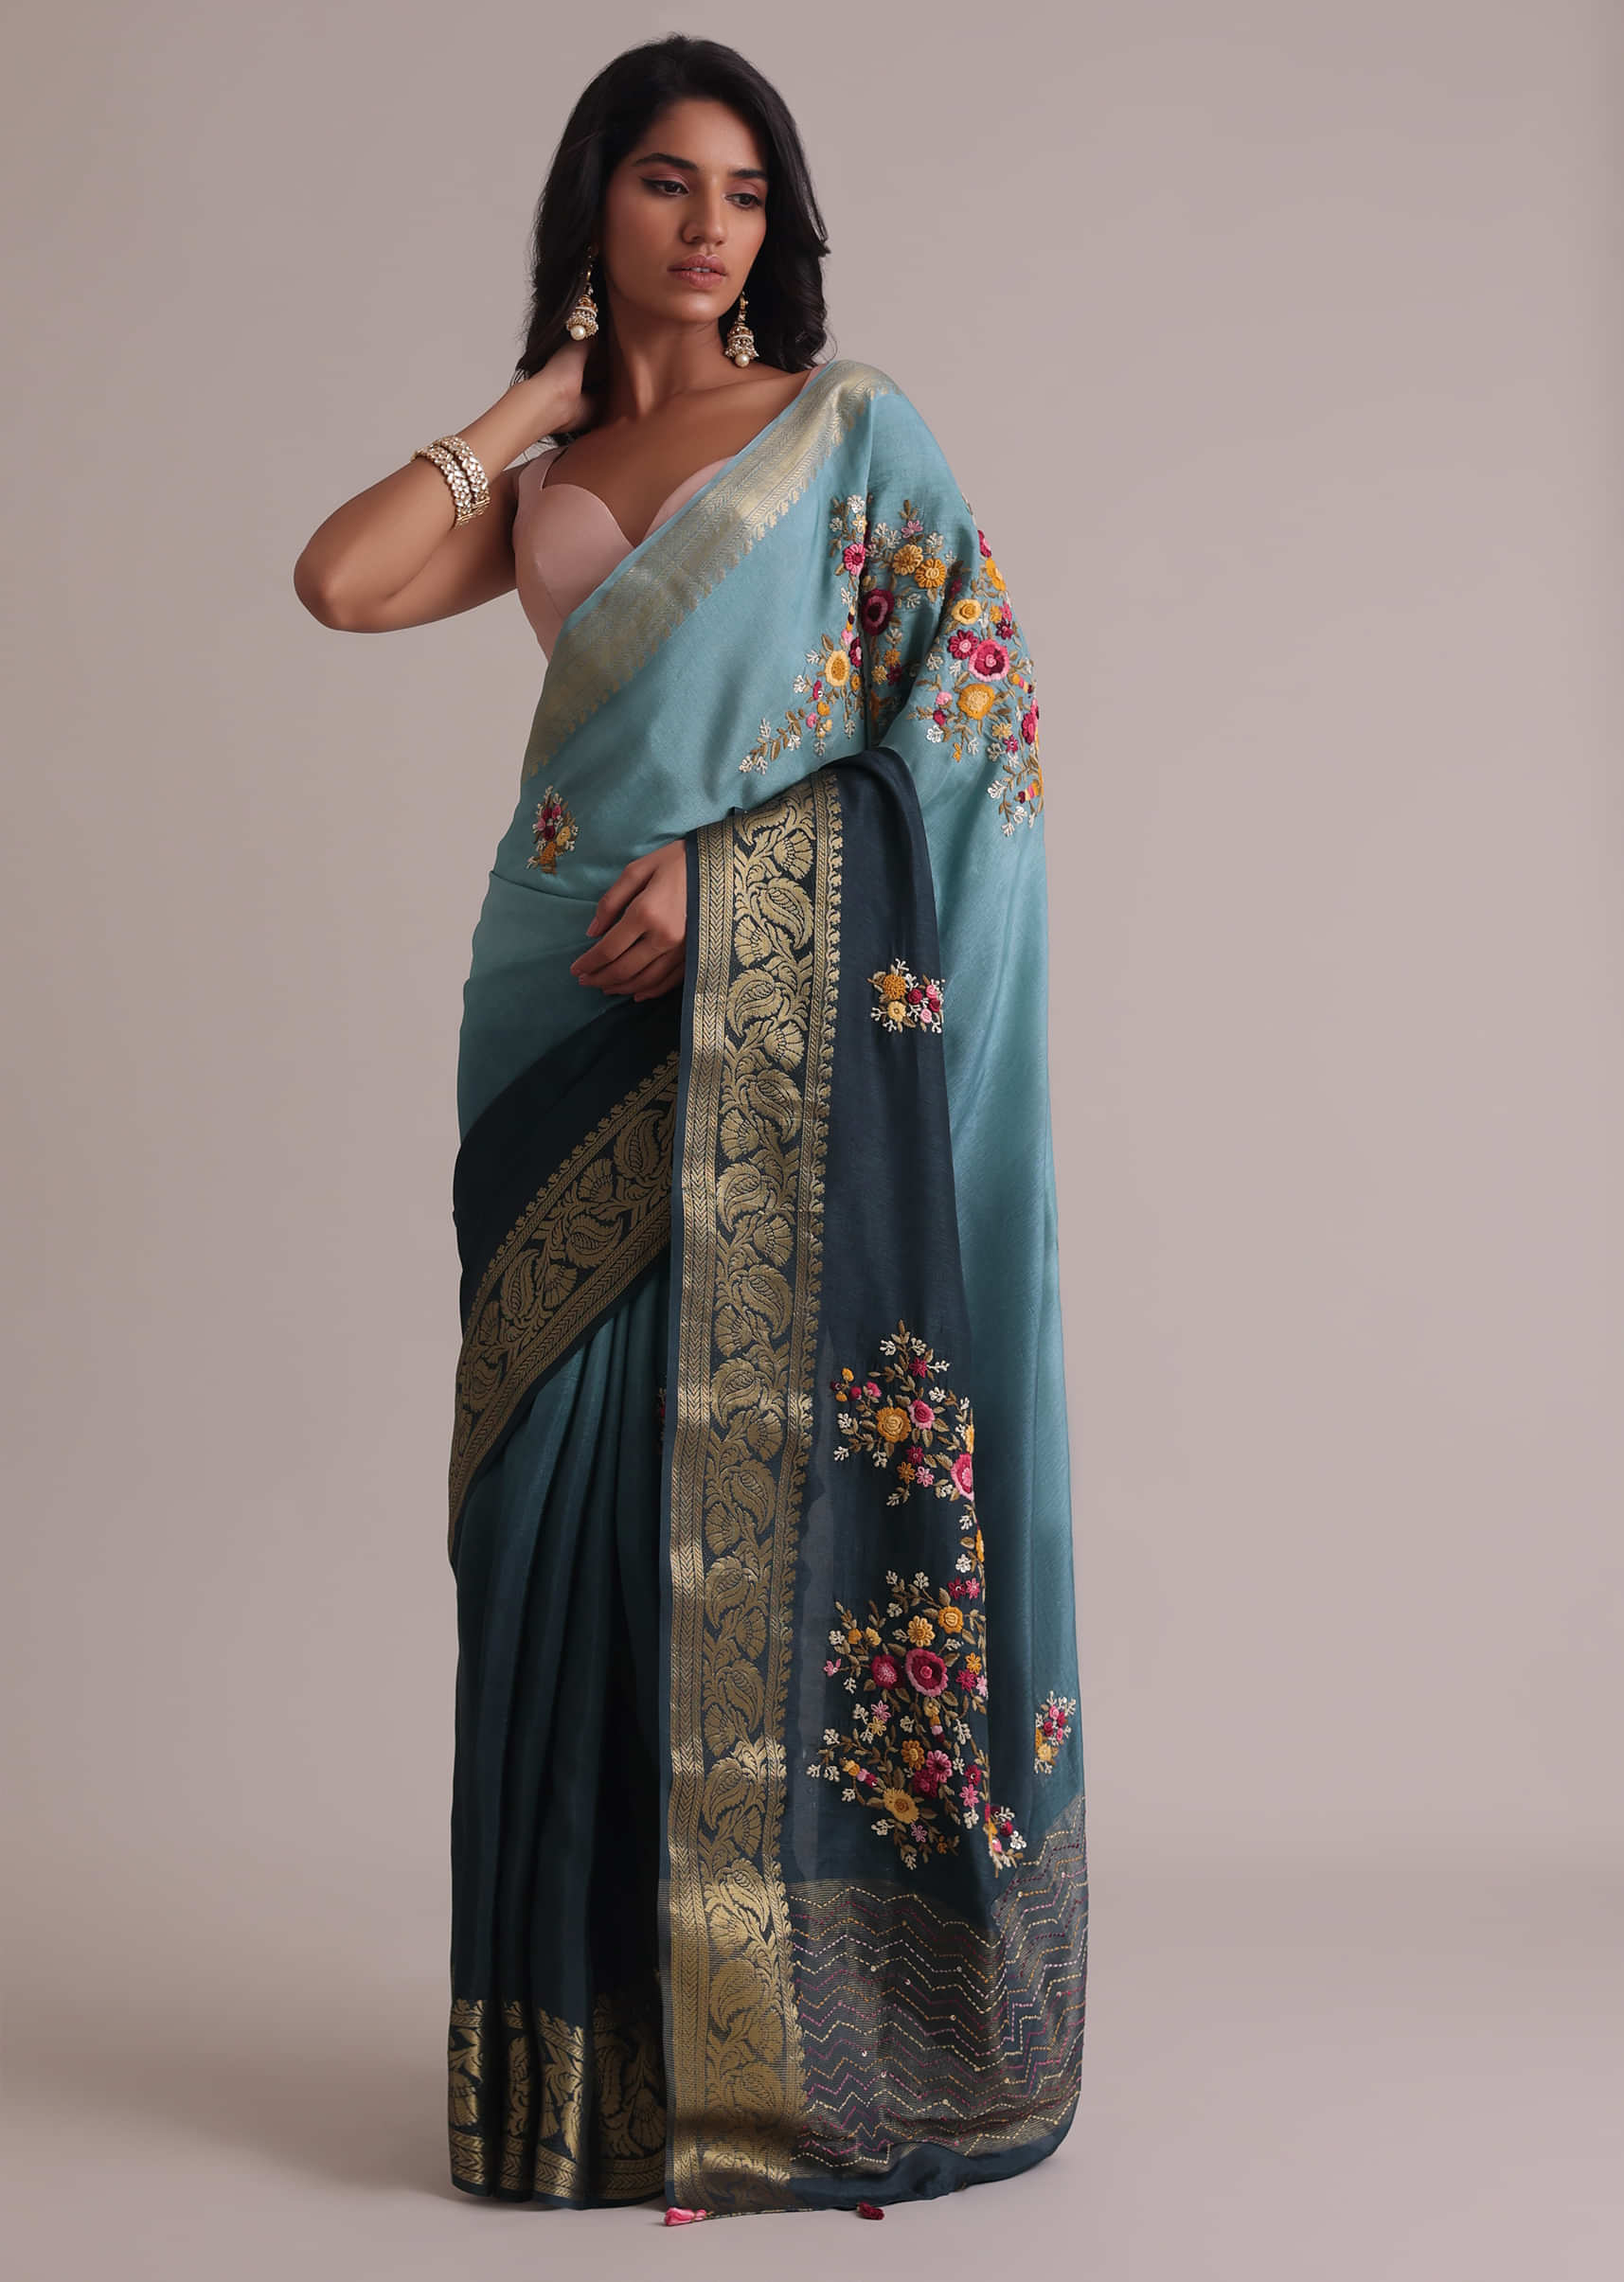 Light And Dark Blue Resham 3D Bud Embroidered Ombre Saree With Brocade And Thread Work In Dola Crepe